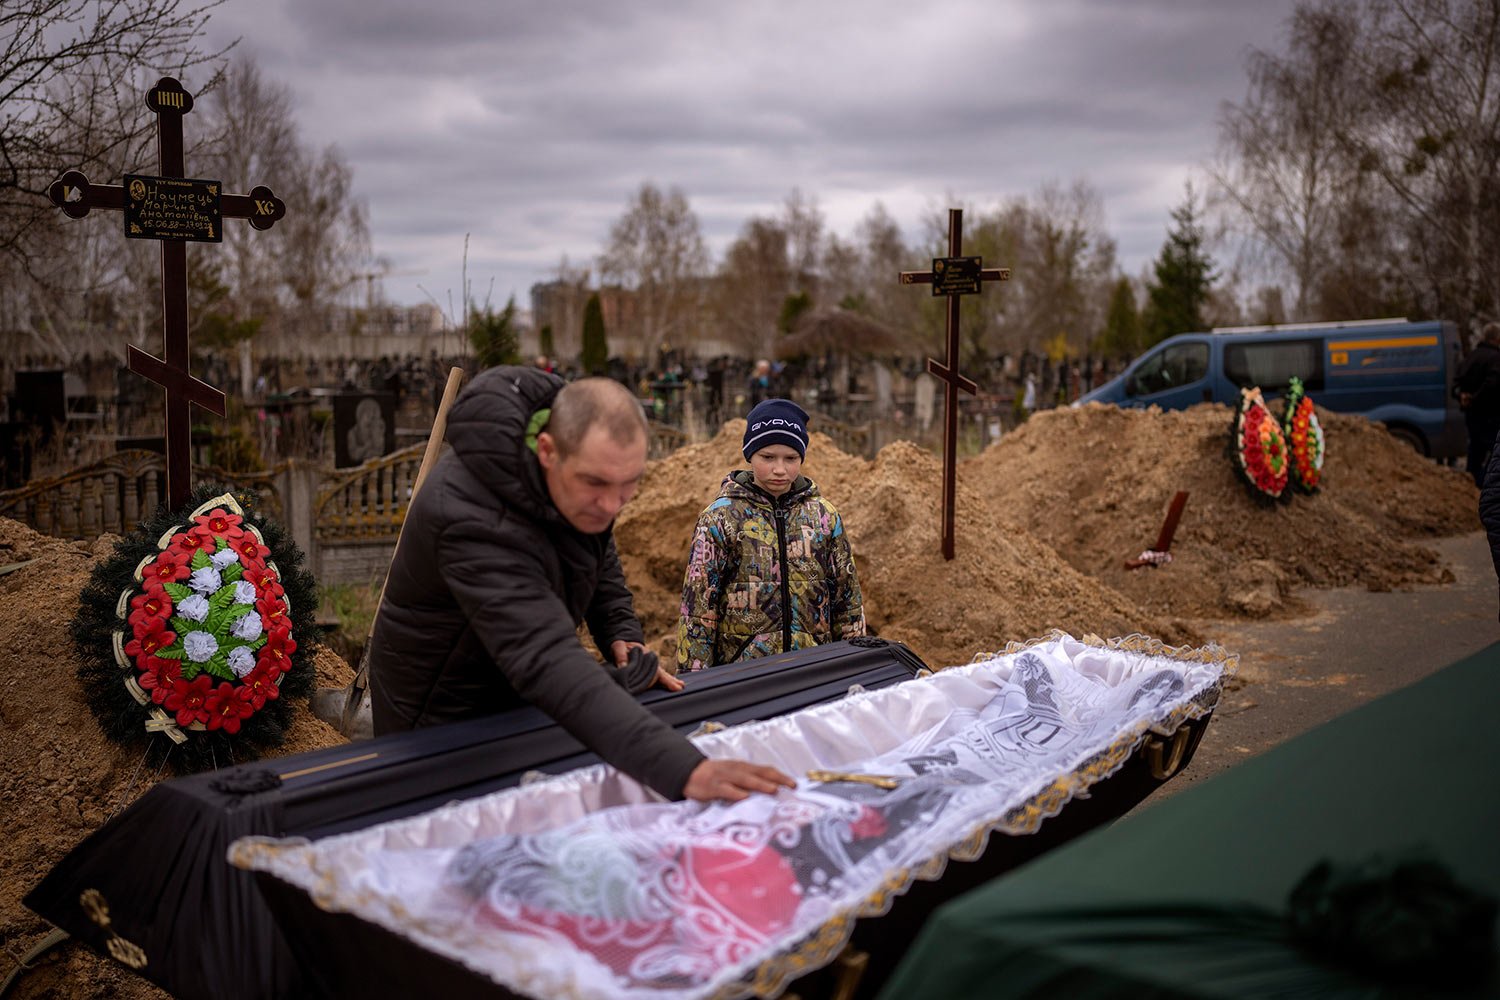  Vova, 10, looks at the body of his mother, Maryna, lying in a coffin as his father, Ivan Drahun, prays during her funeral in Bucha, on the outskirts of Kyiv, Ukraine, on Wednesday, April 20, 2022. Vova's mother died while they sheltered in a cold ba